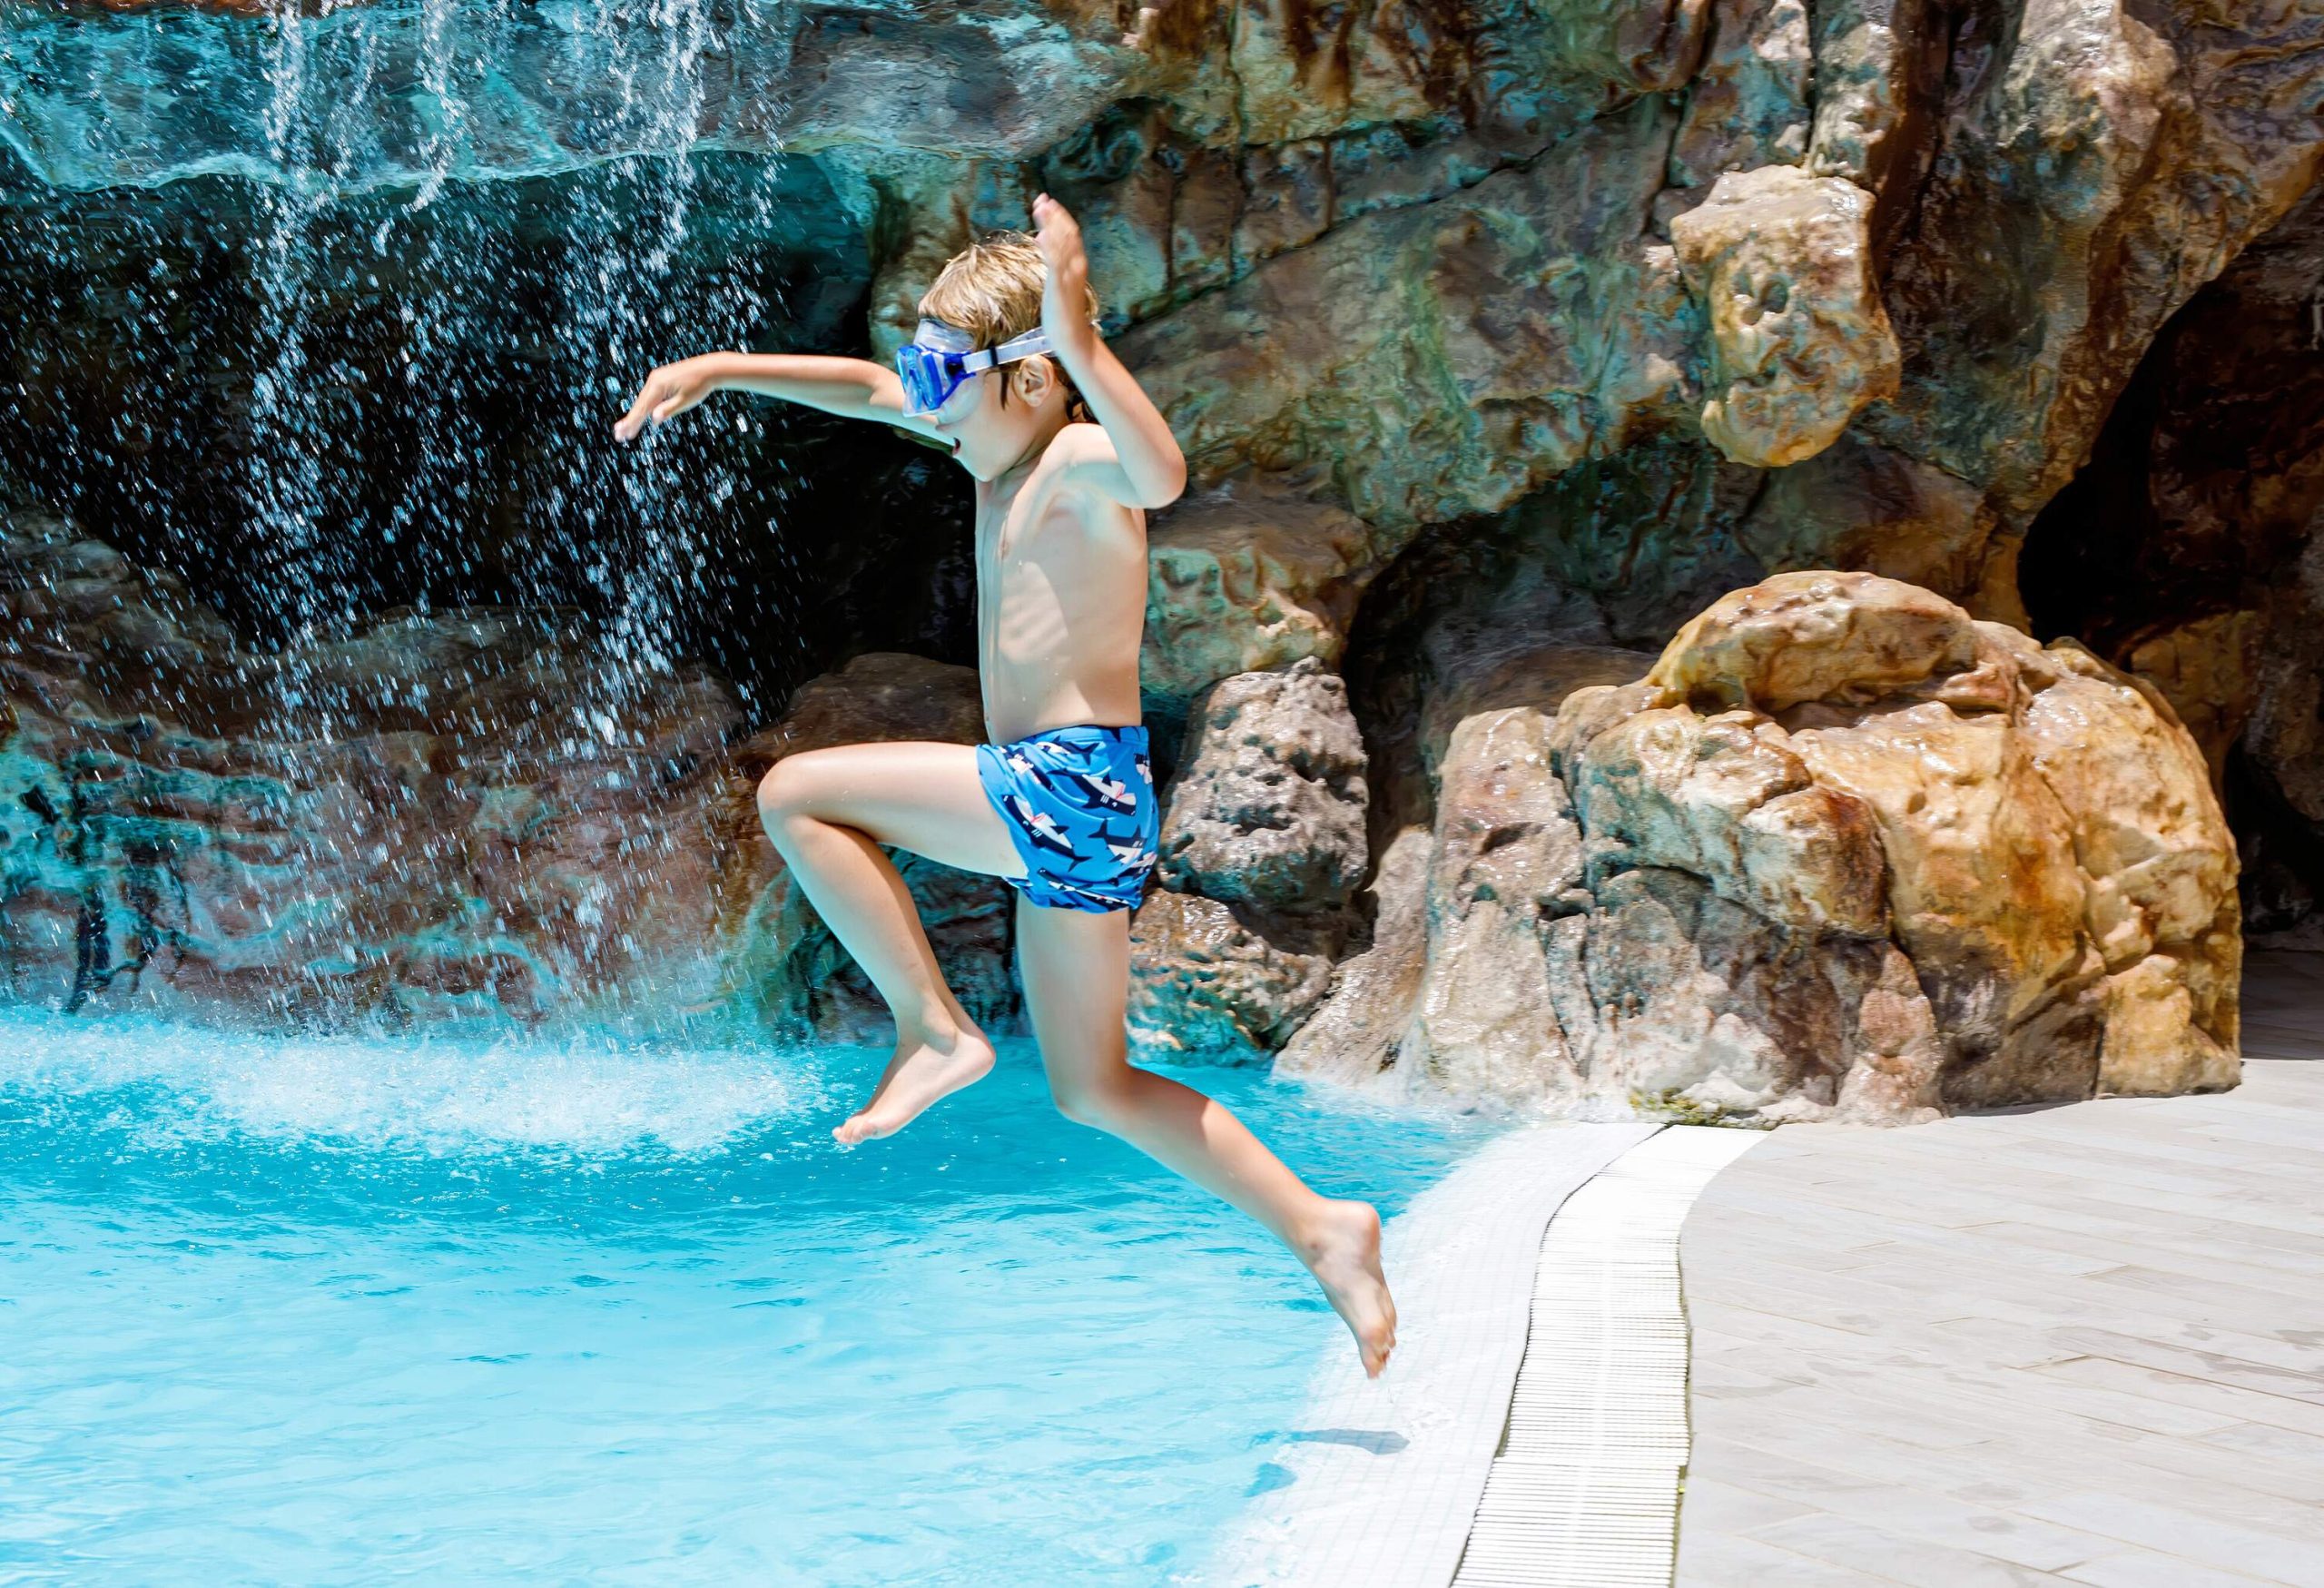 A boy with goggles jumps above a pool.